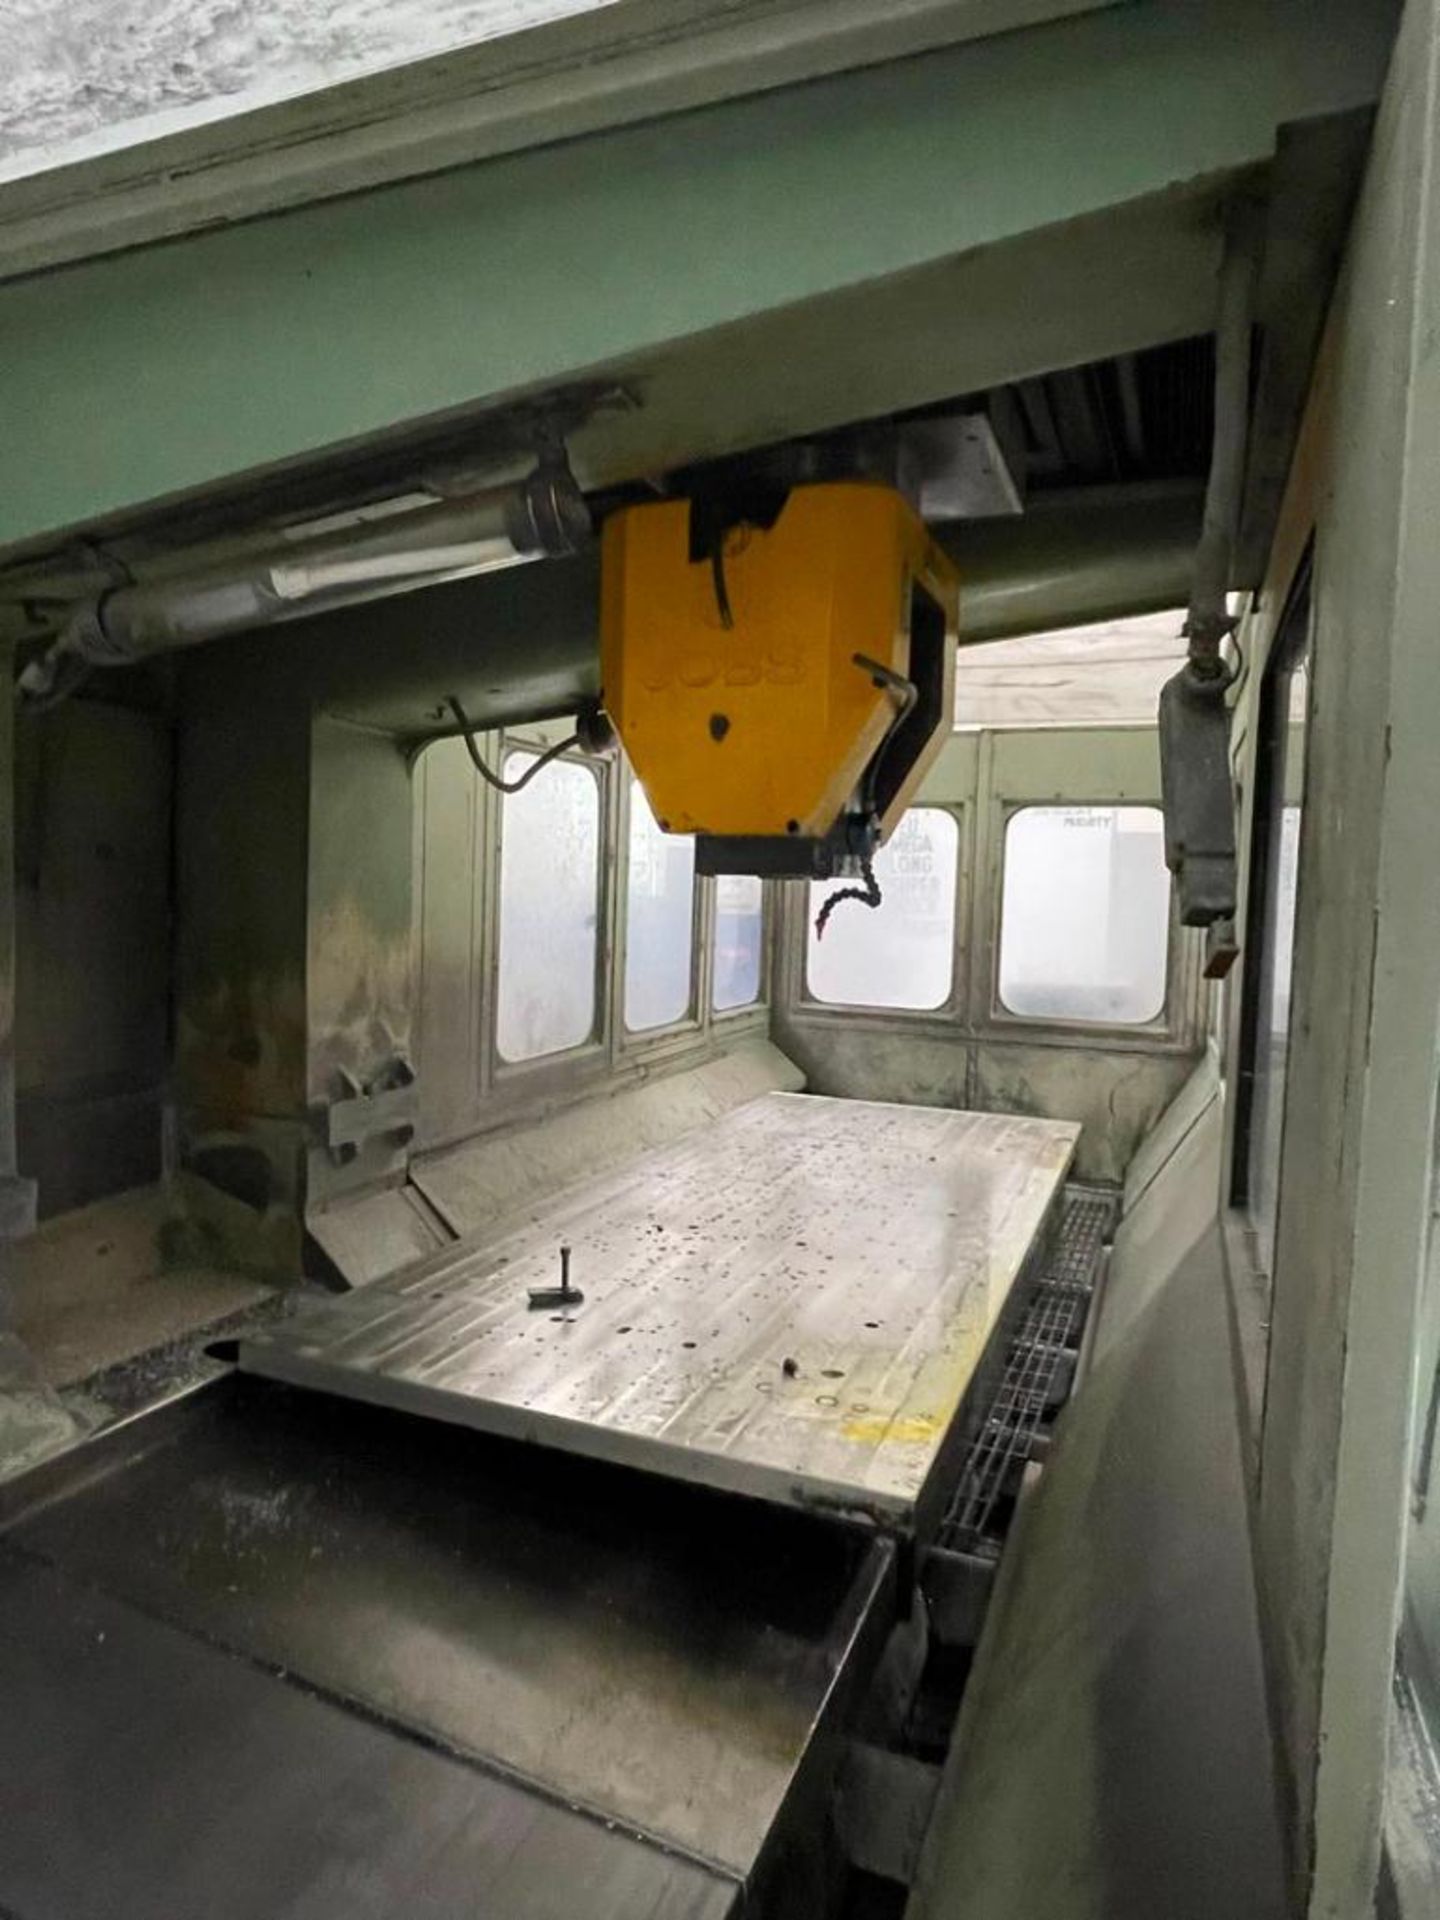 JOBS JOMACH 131 5-Axis CNC Vertical Machining Center - Image 4 of 9